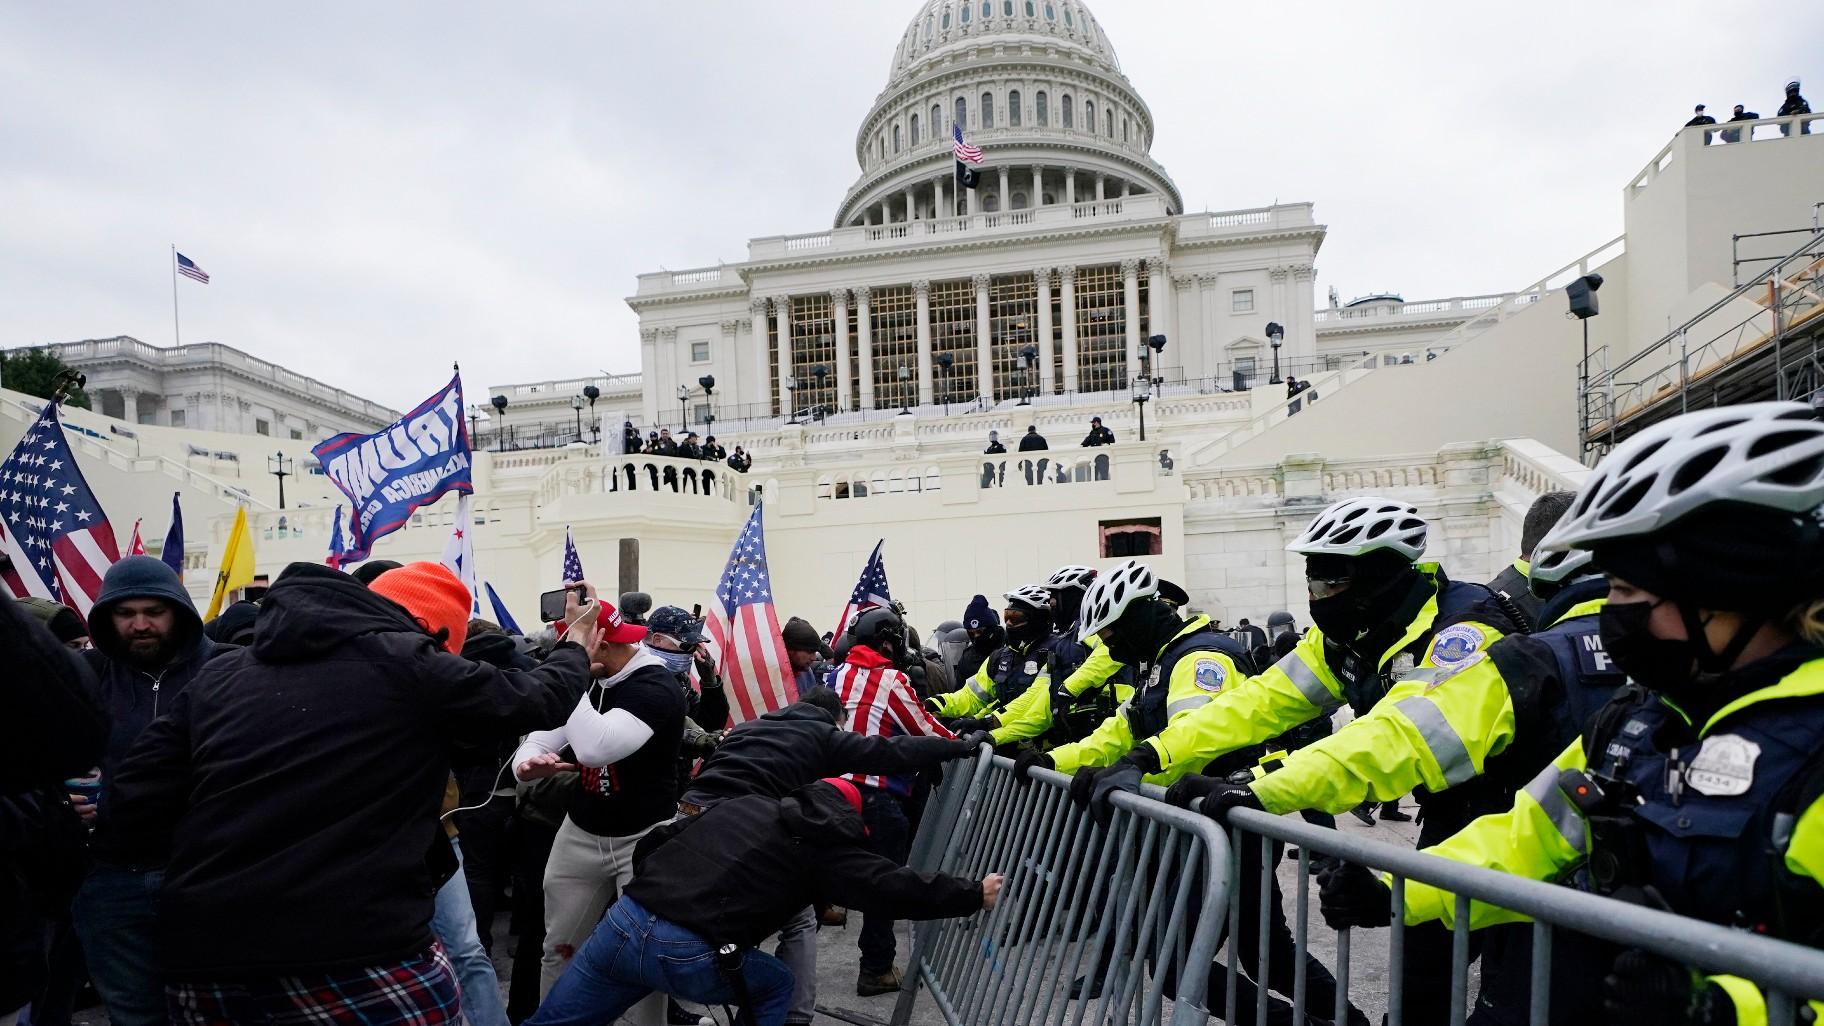 Rebels loyal to President Donald Trump try to breach a police barrier in the Capitol, Washington, Wednesday, January 6, 2021.  (AP Photo/Julio Cortez, FILE)